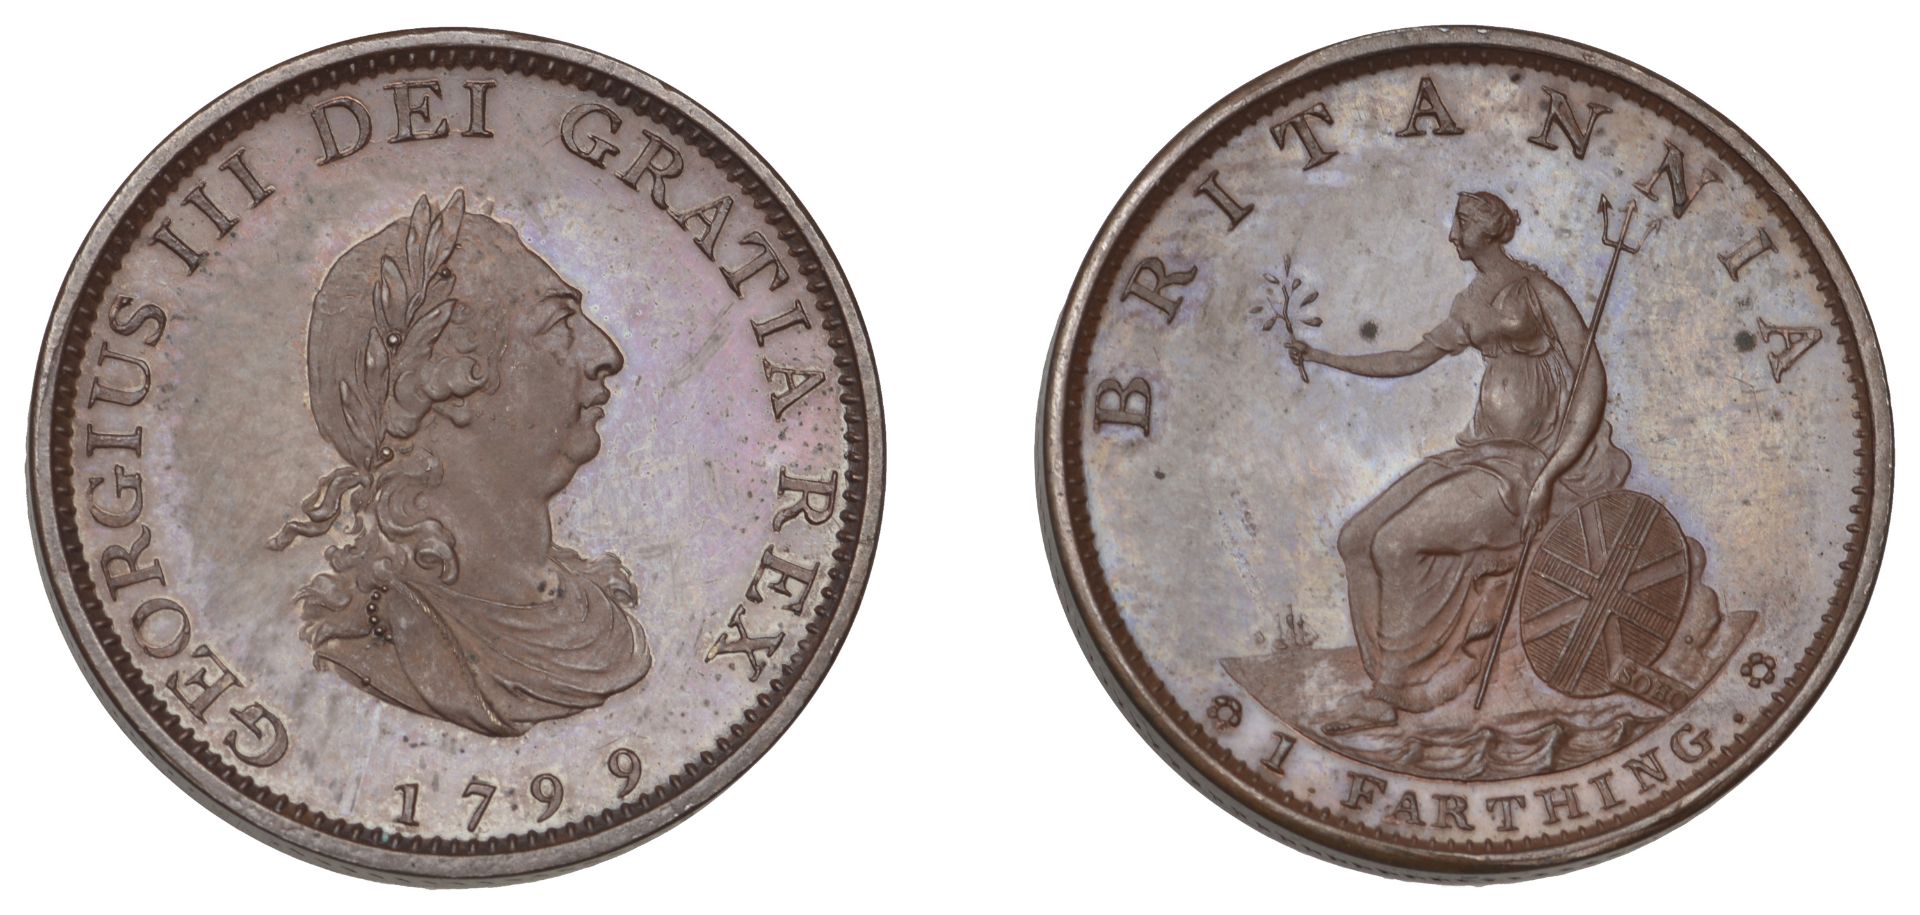 George III (1760-1820), Pre-1816 issues, Restrike Proof Farthing, 1799, in bronzed-copper, e...